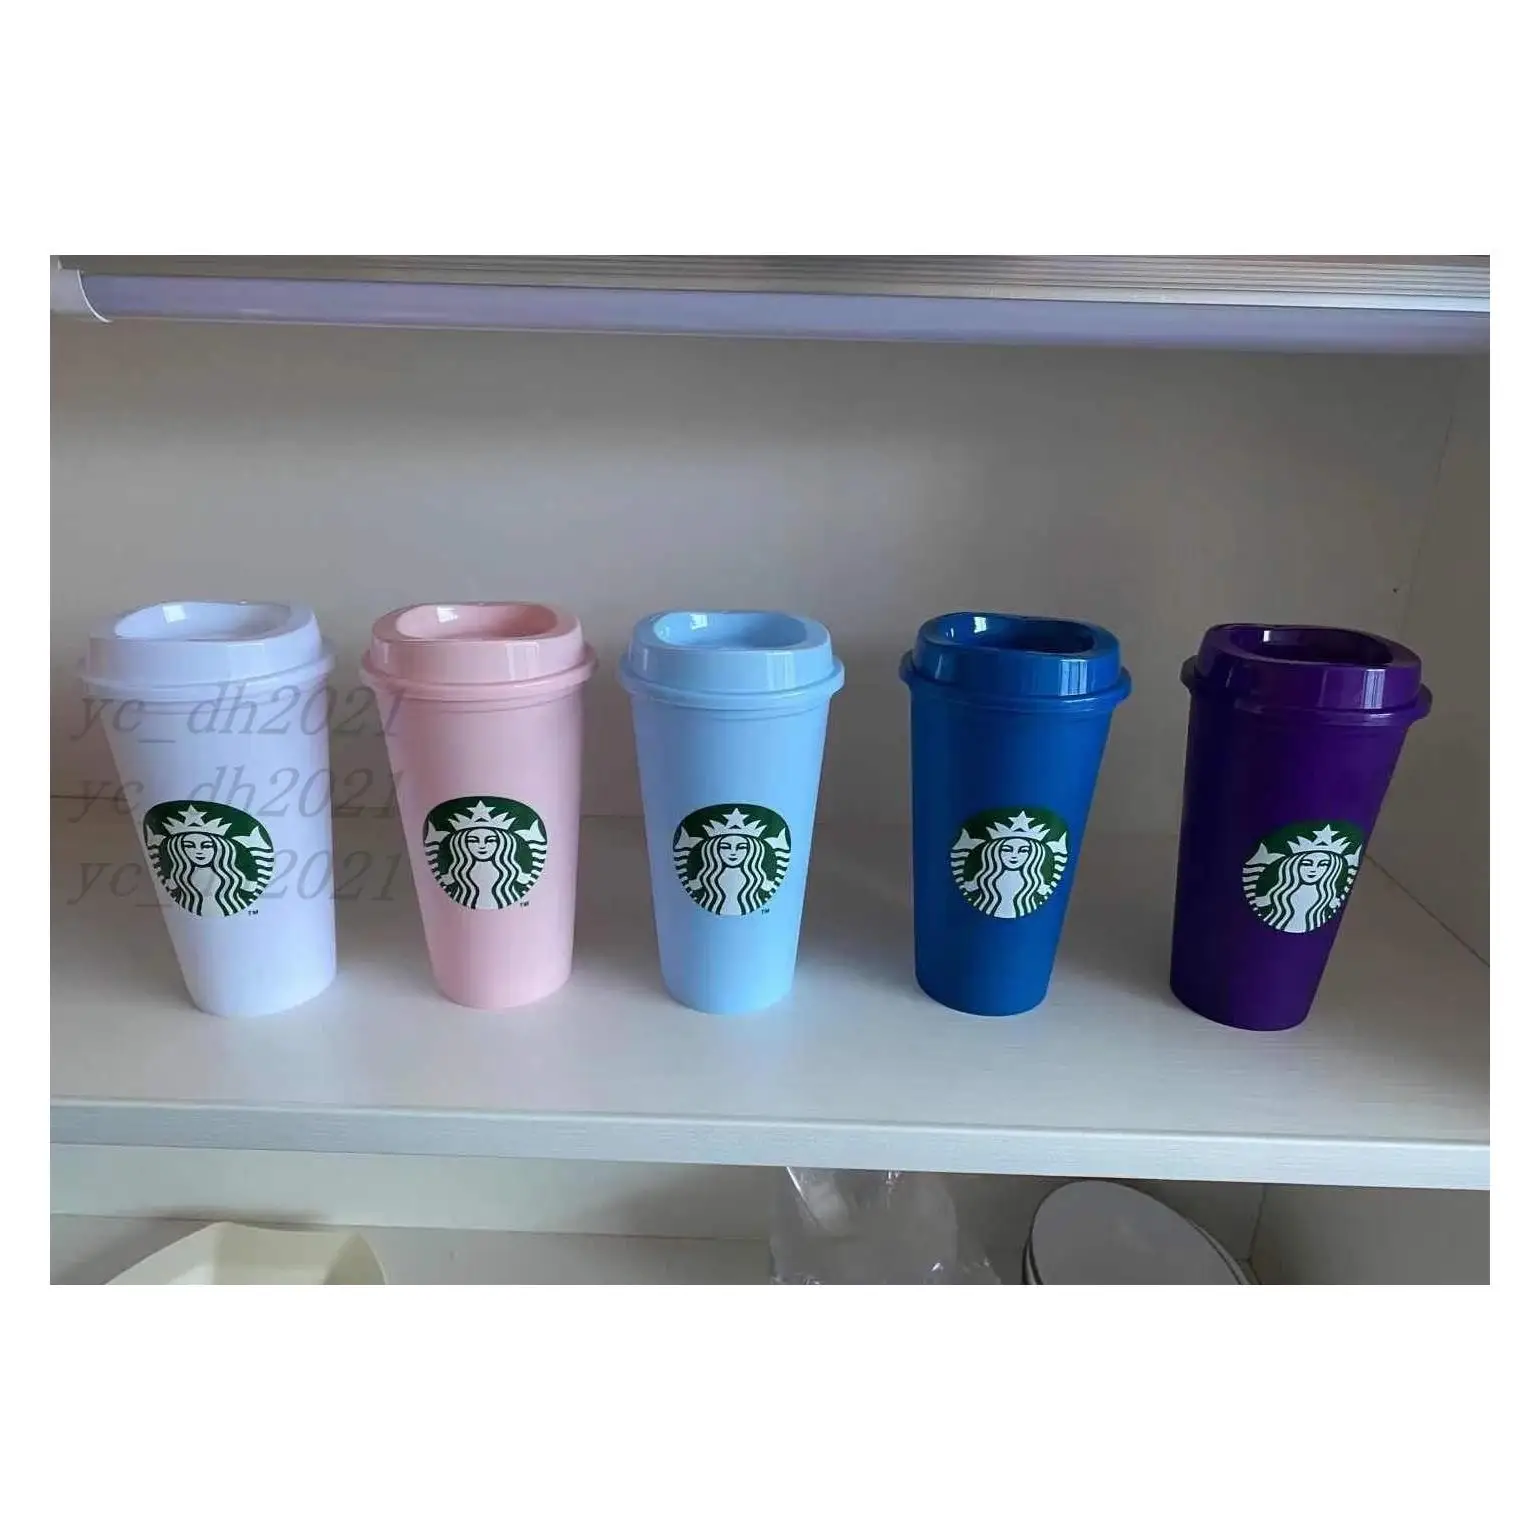 

Starbucks 16Oz473Ml Color Change Tumblers Plastic Reusable Drinking Juice Cup With Lip Magic Coffee Mugs